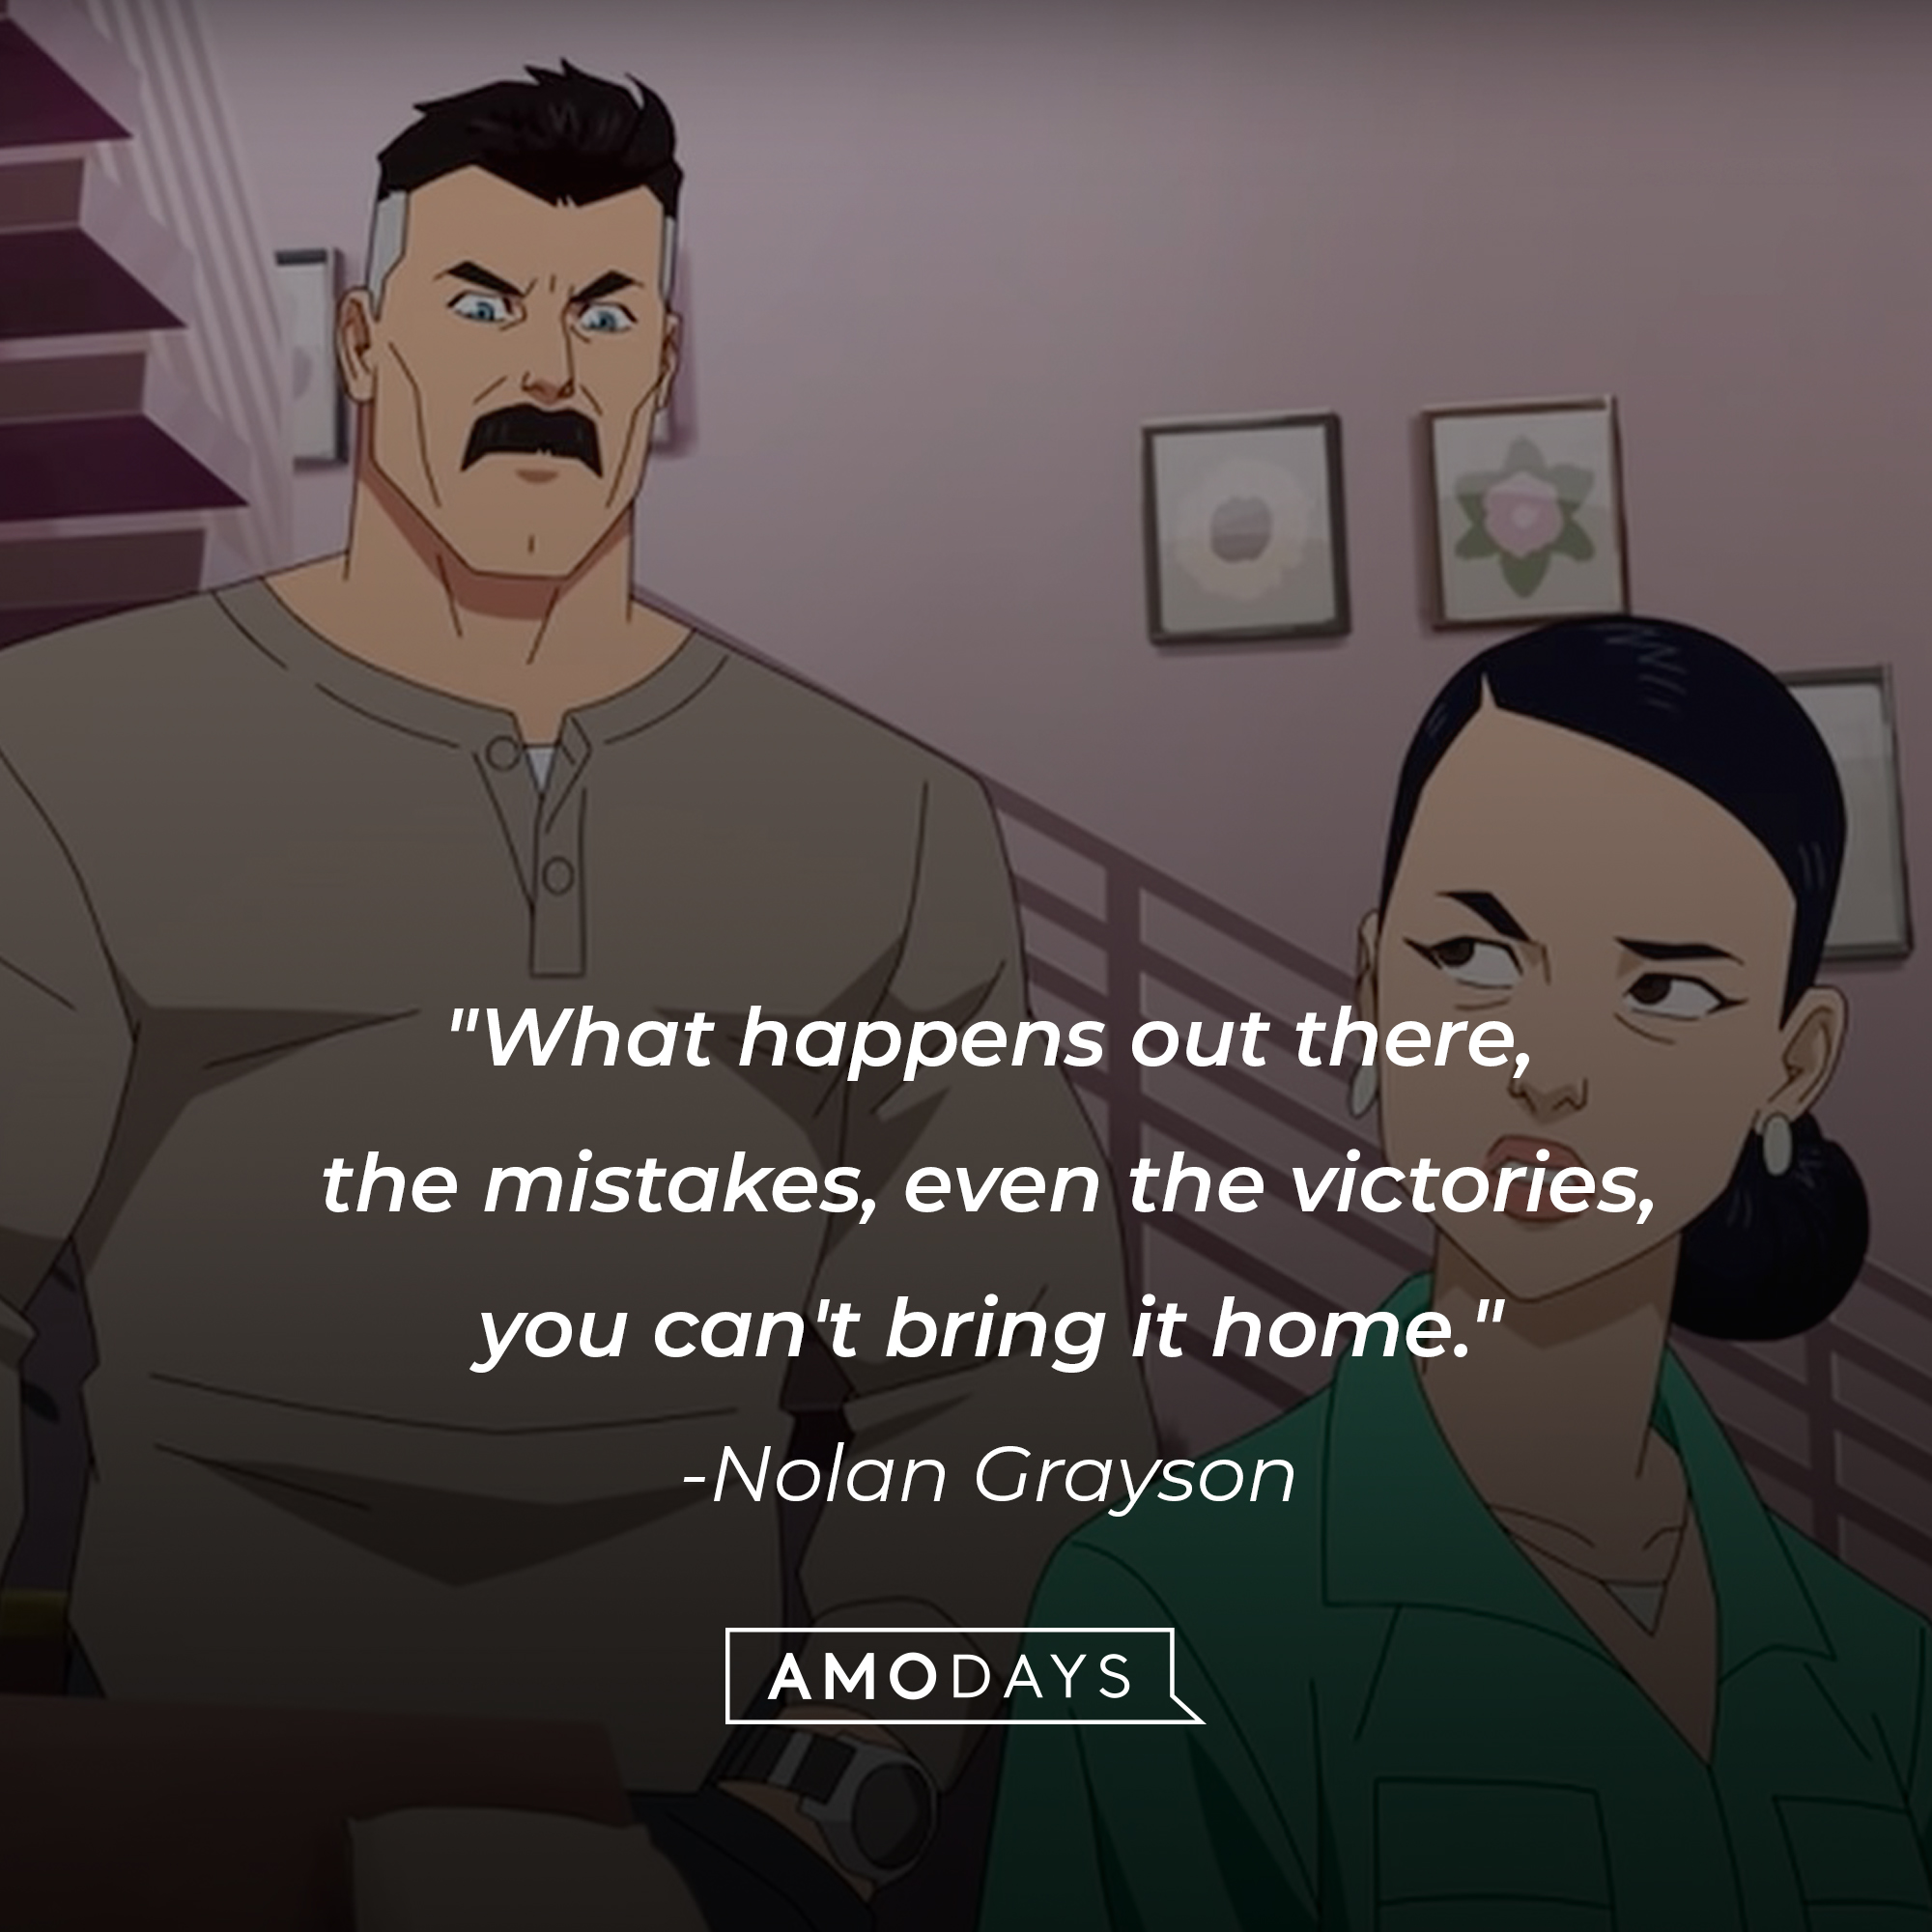 Nolan Grayson's quote: "What happens out there, the mistakes, even the victories, you can't bring it home." | Source: Facebook.com/Invincibleuniverse